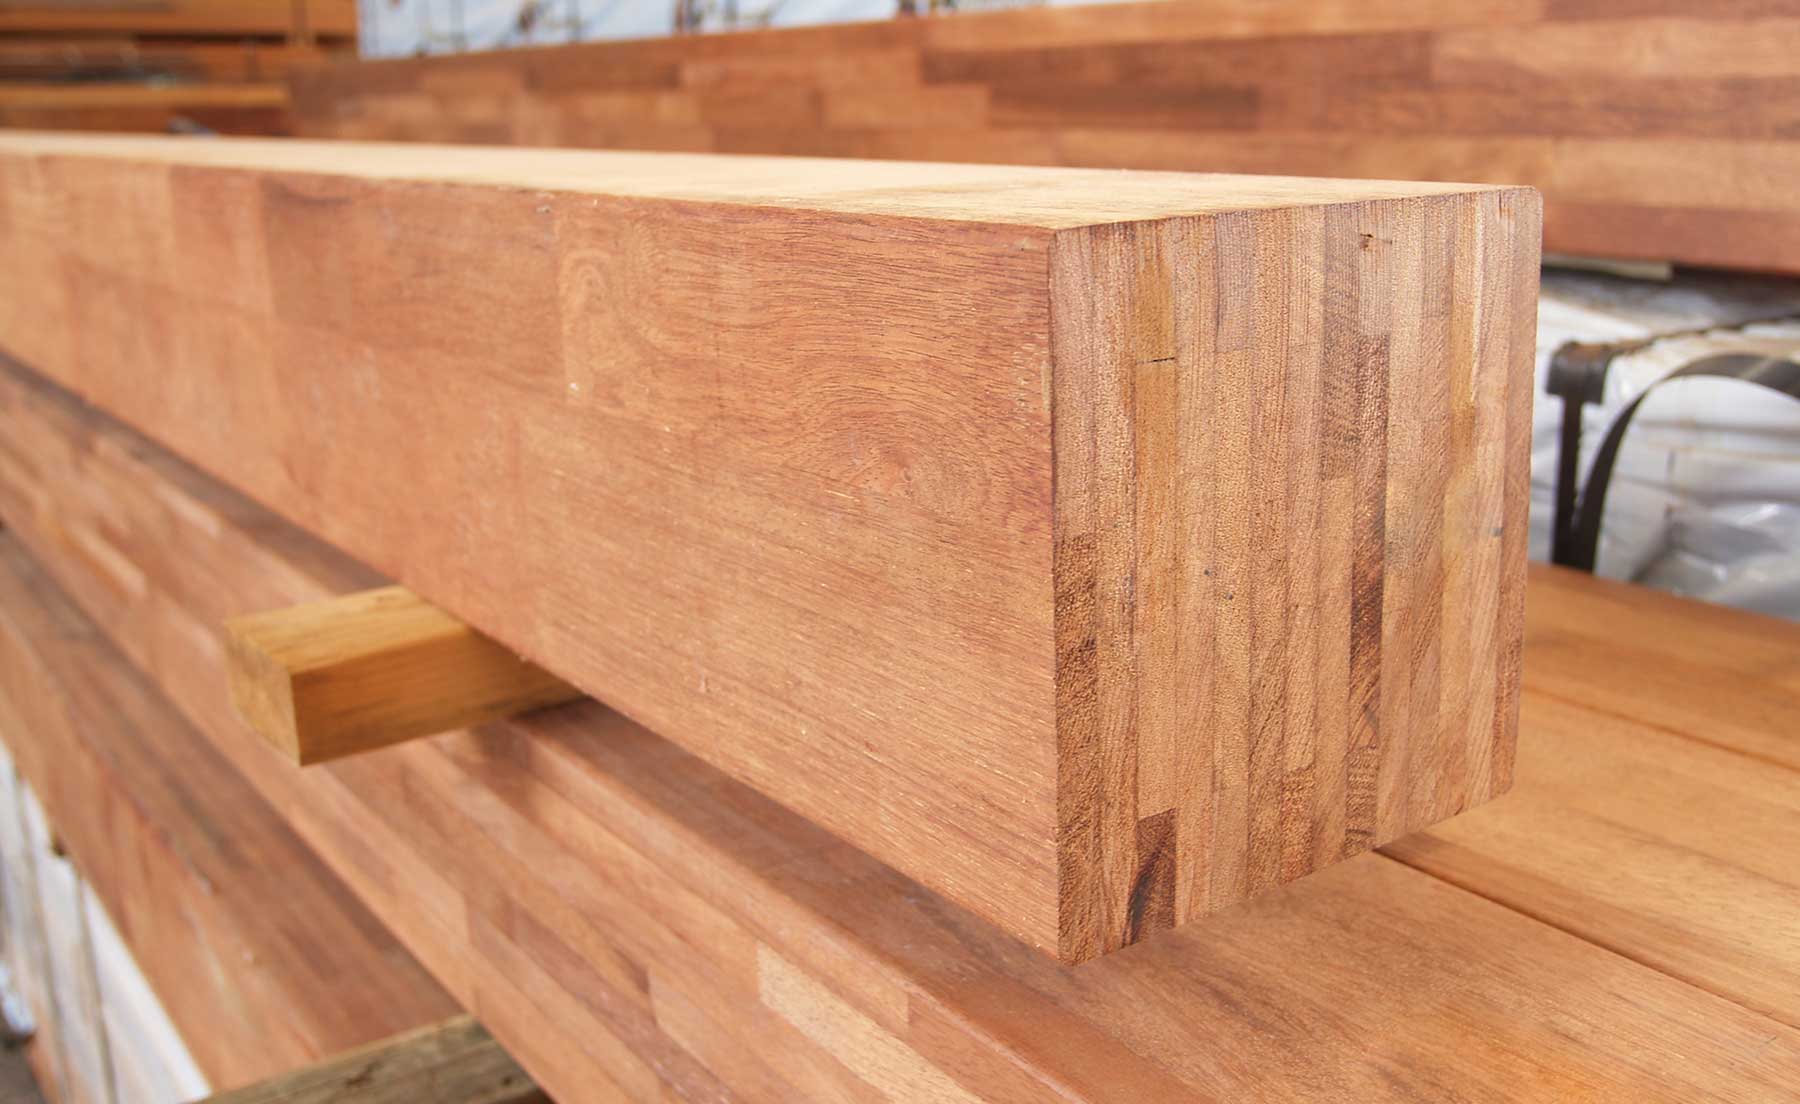 Timber Products | Timber Products - specialists in laminated timber ...